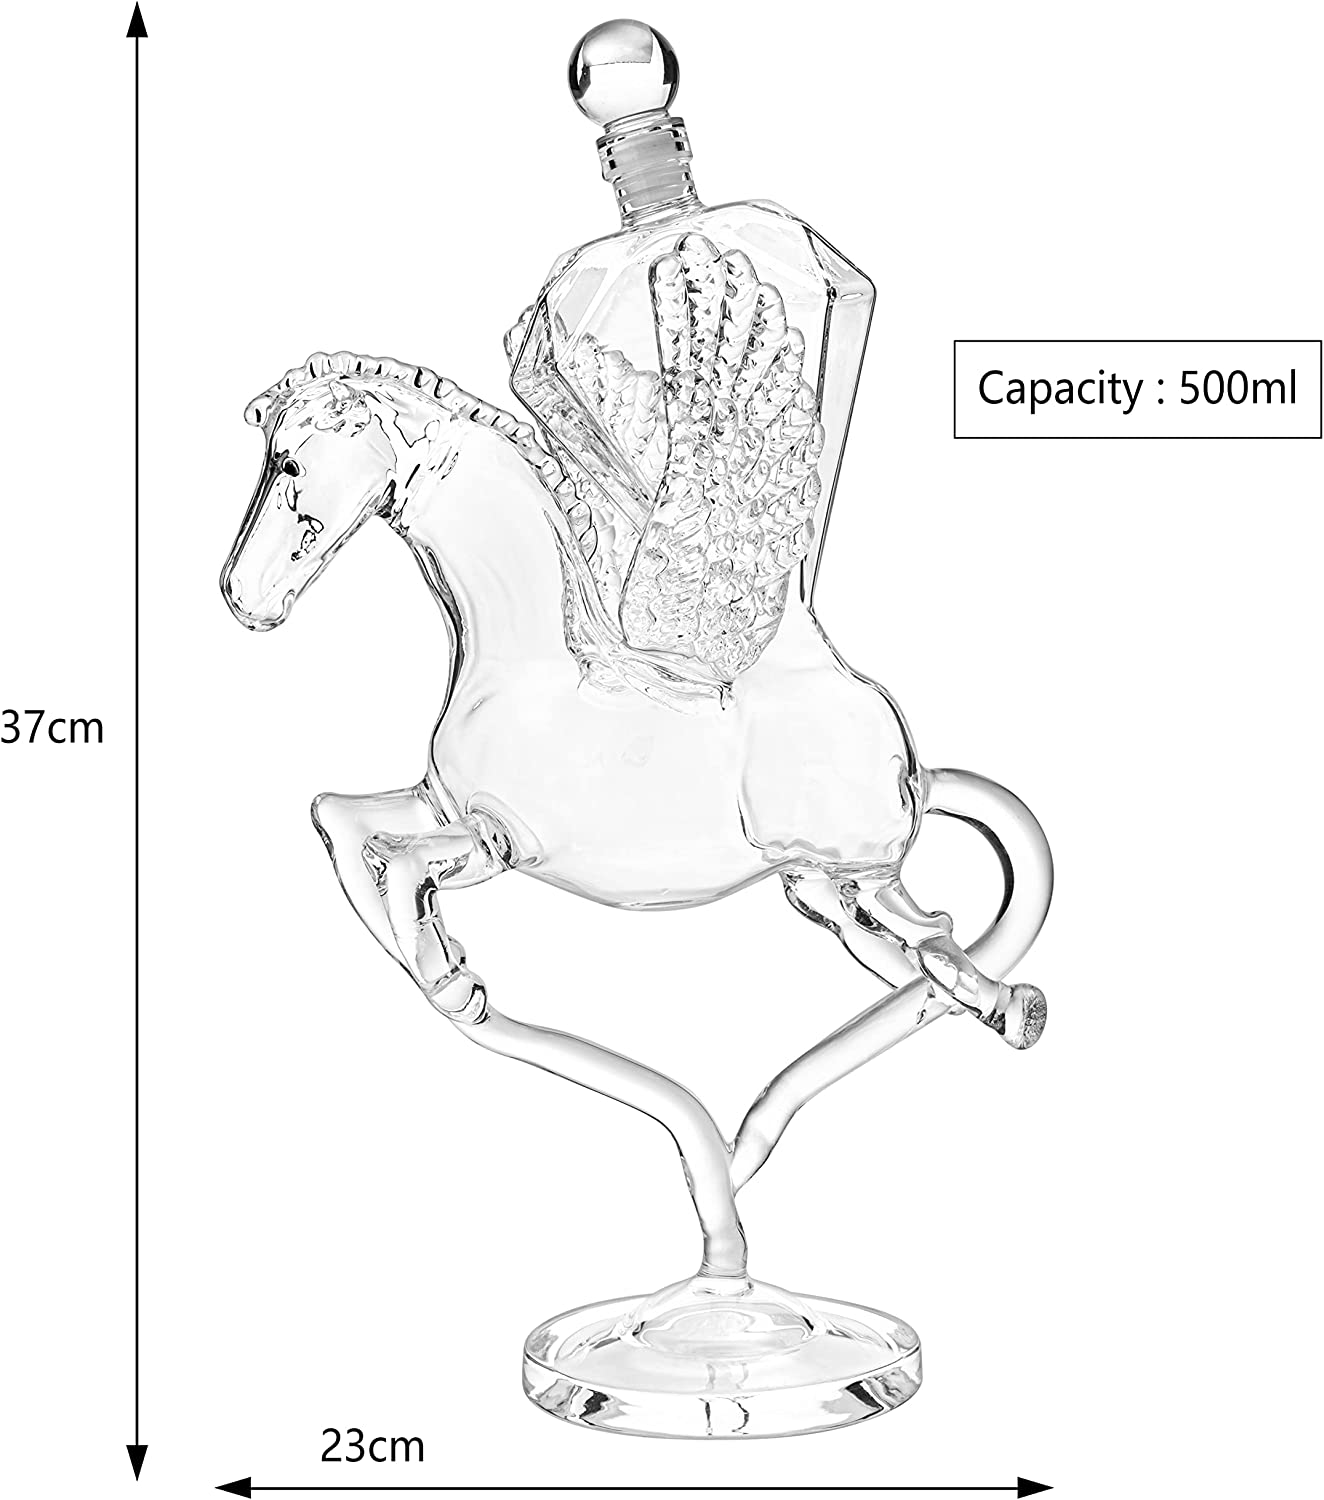 Pegasus Crystal Decanter, For Wine & Whiskey by The Wine Savant - 12" Tall - For Spirits, Whiskey, Scotch, Bourbon, Cognac and Brandy - 500mL - By The Wine Savant - Pegasus Horse Winged Diamond by The Wine Savant